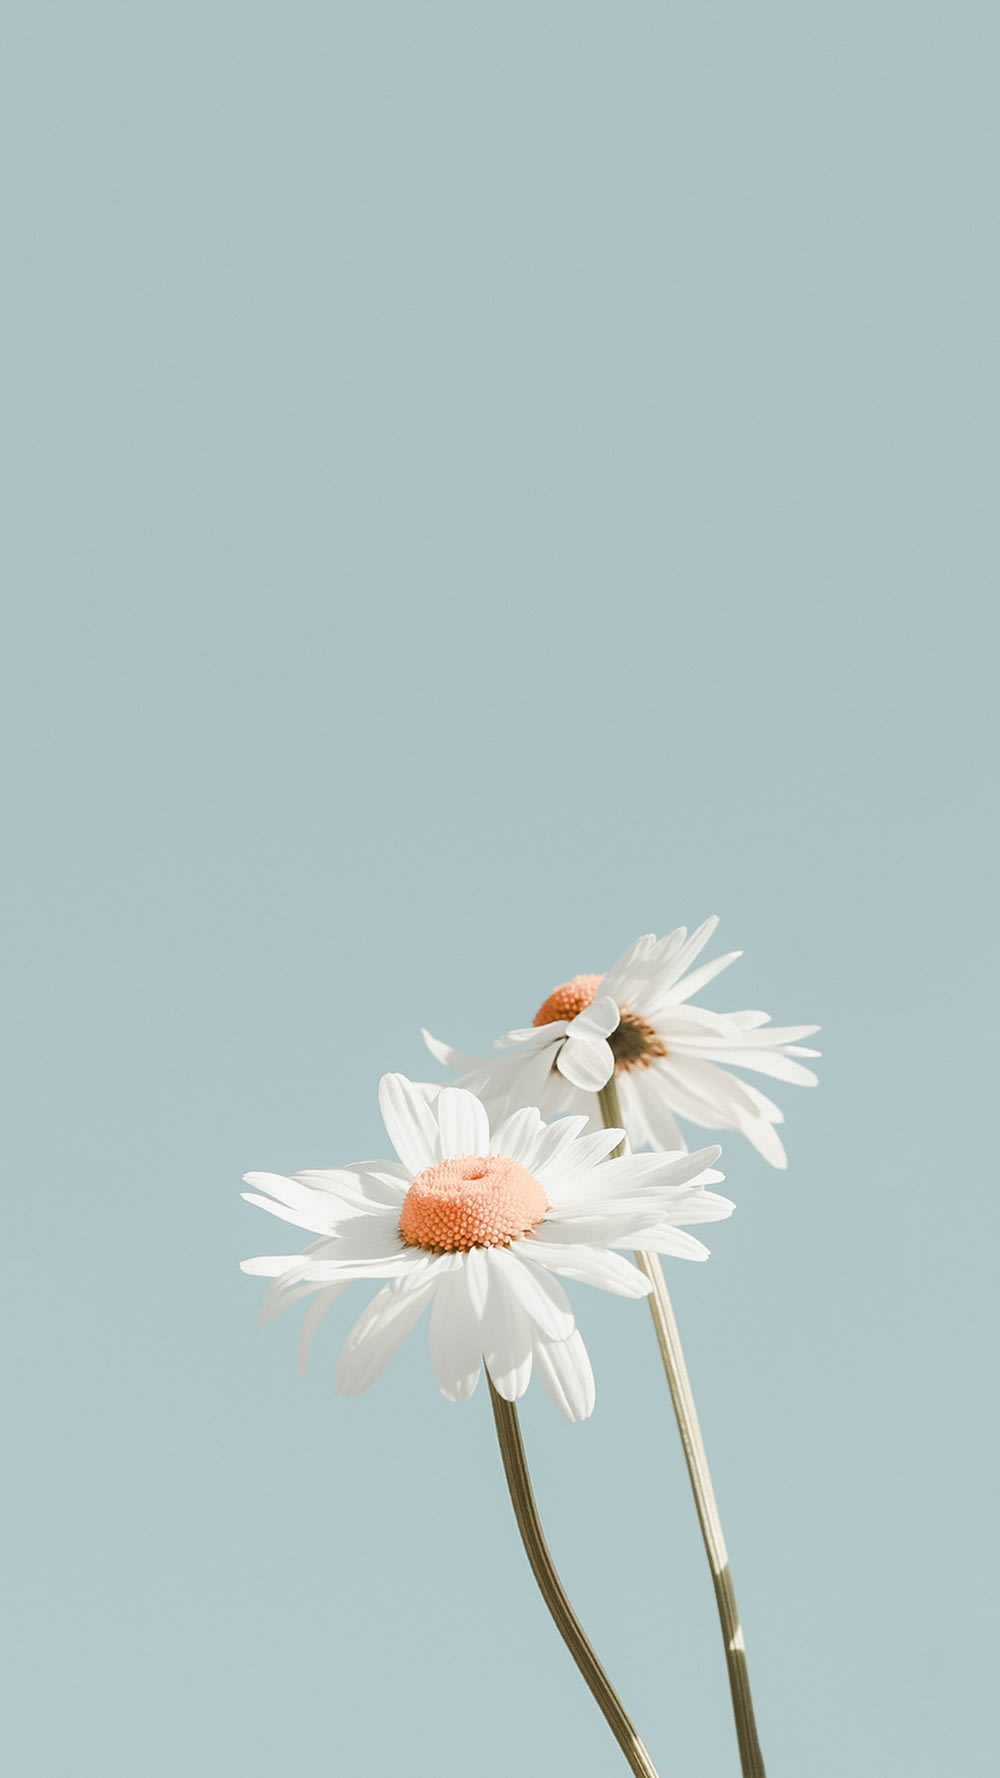 three daisies in a vase against a blue sky